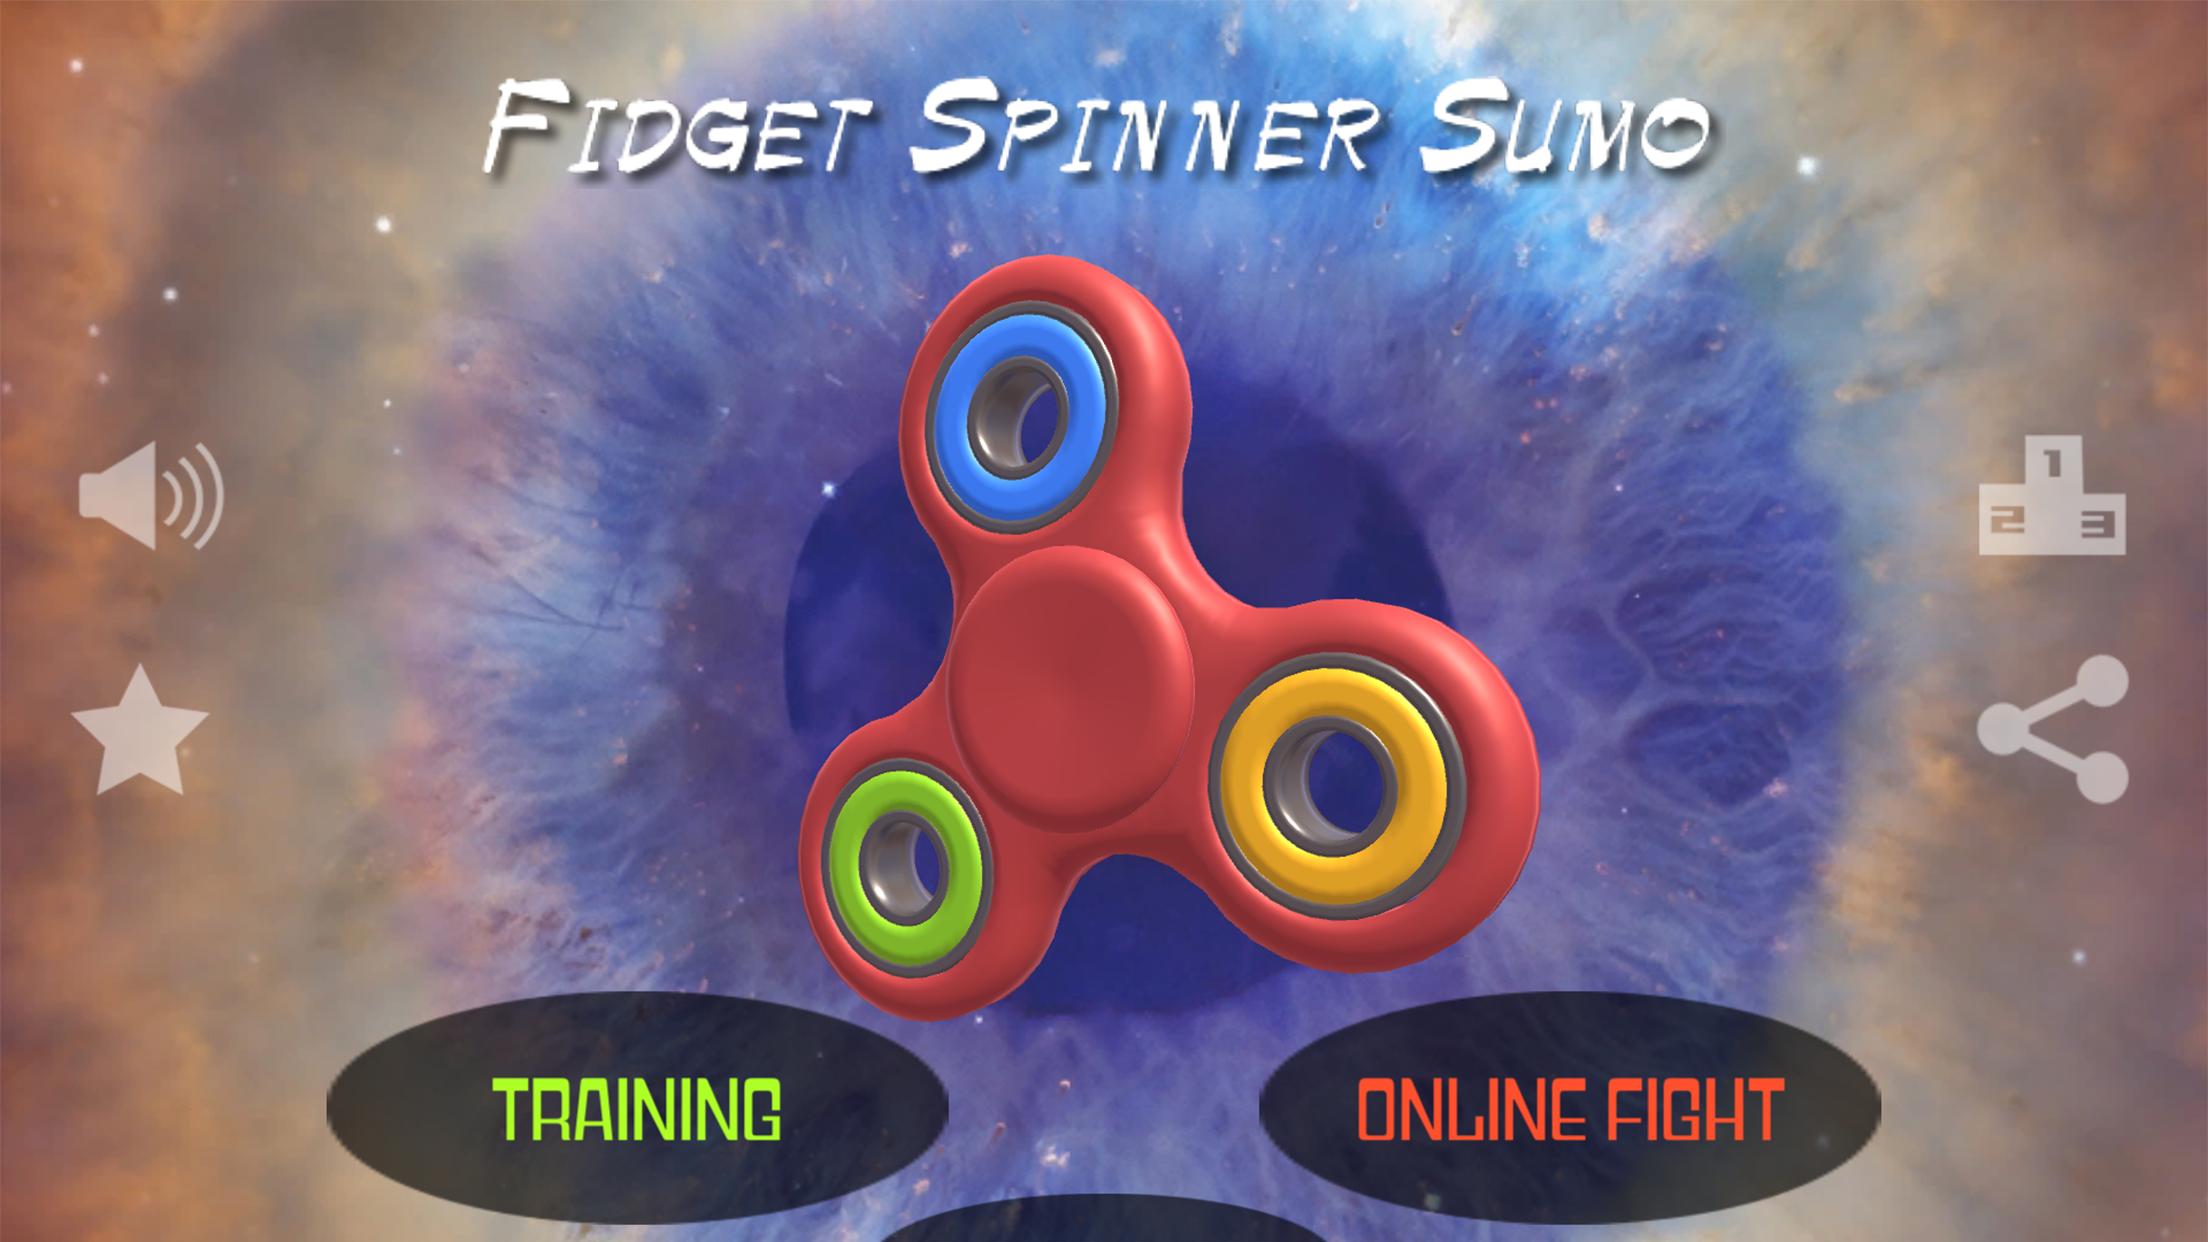 Fidget Spinner Sumo - 3D Online Fight!!! for Android - APK Download